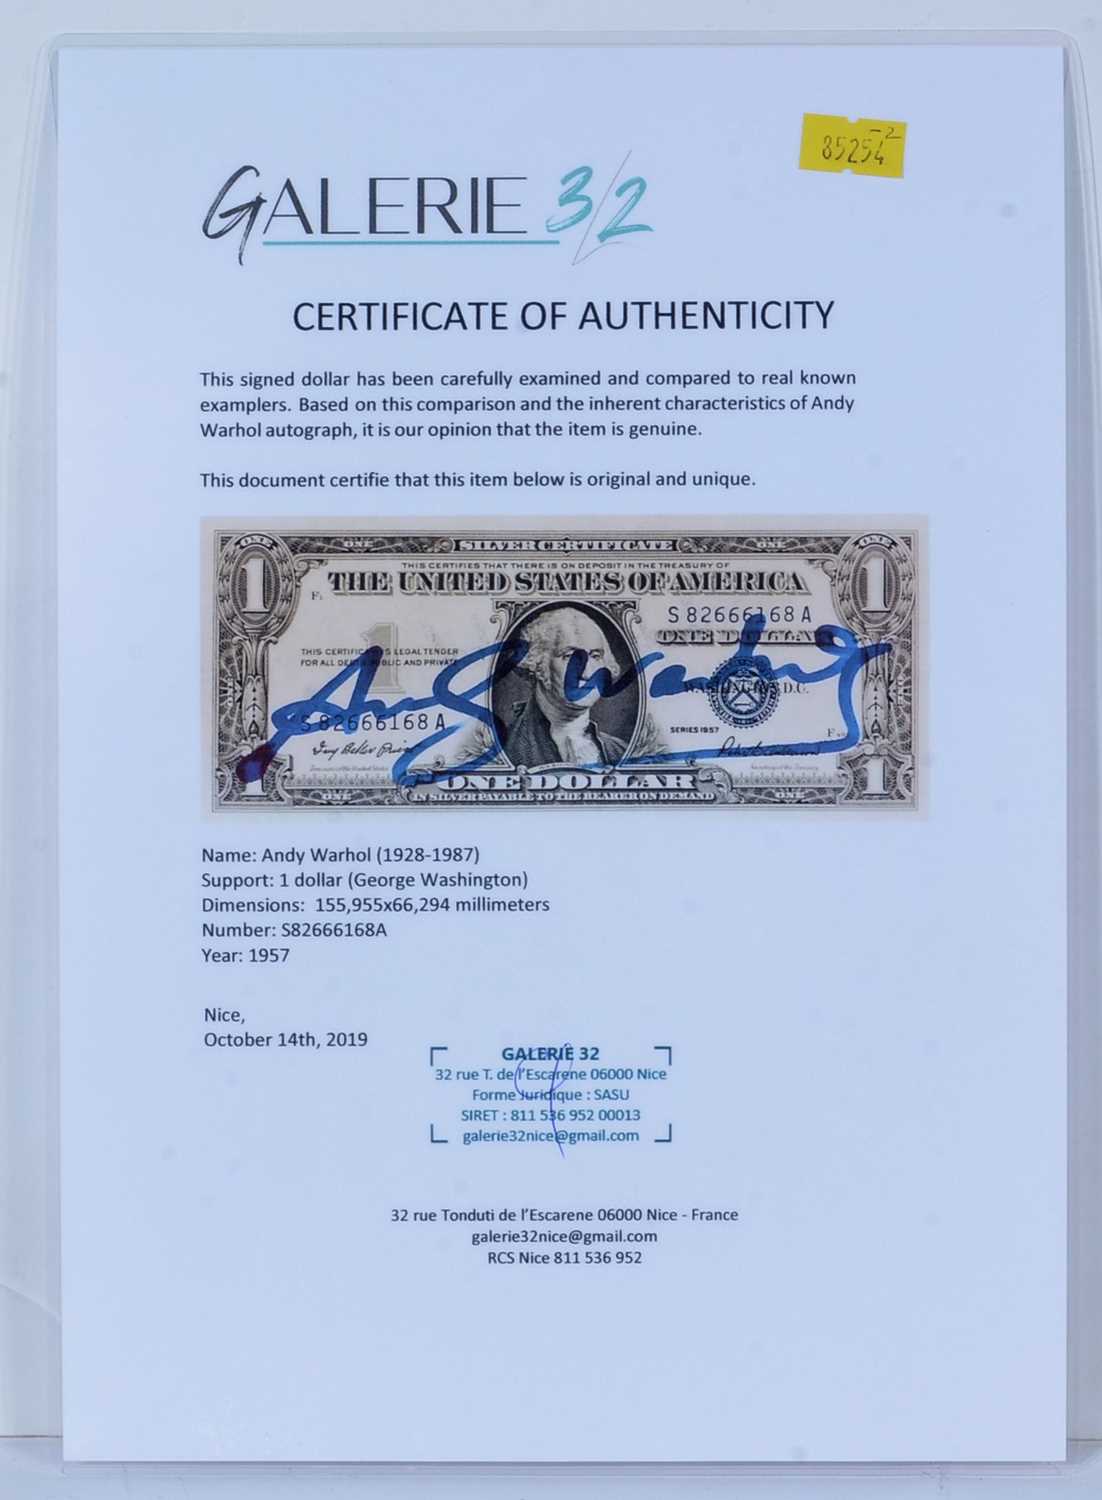 Andy Warhol - Signed One Dollar Bill (George Washington) | pen and ink - Image 2 of 4